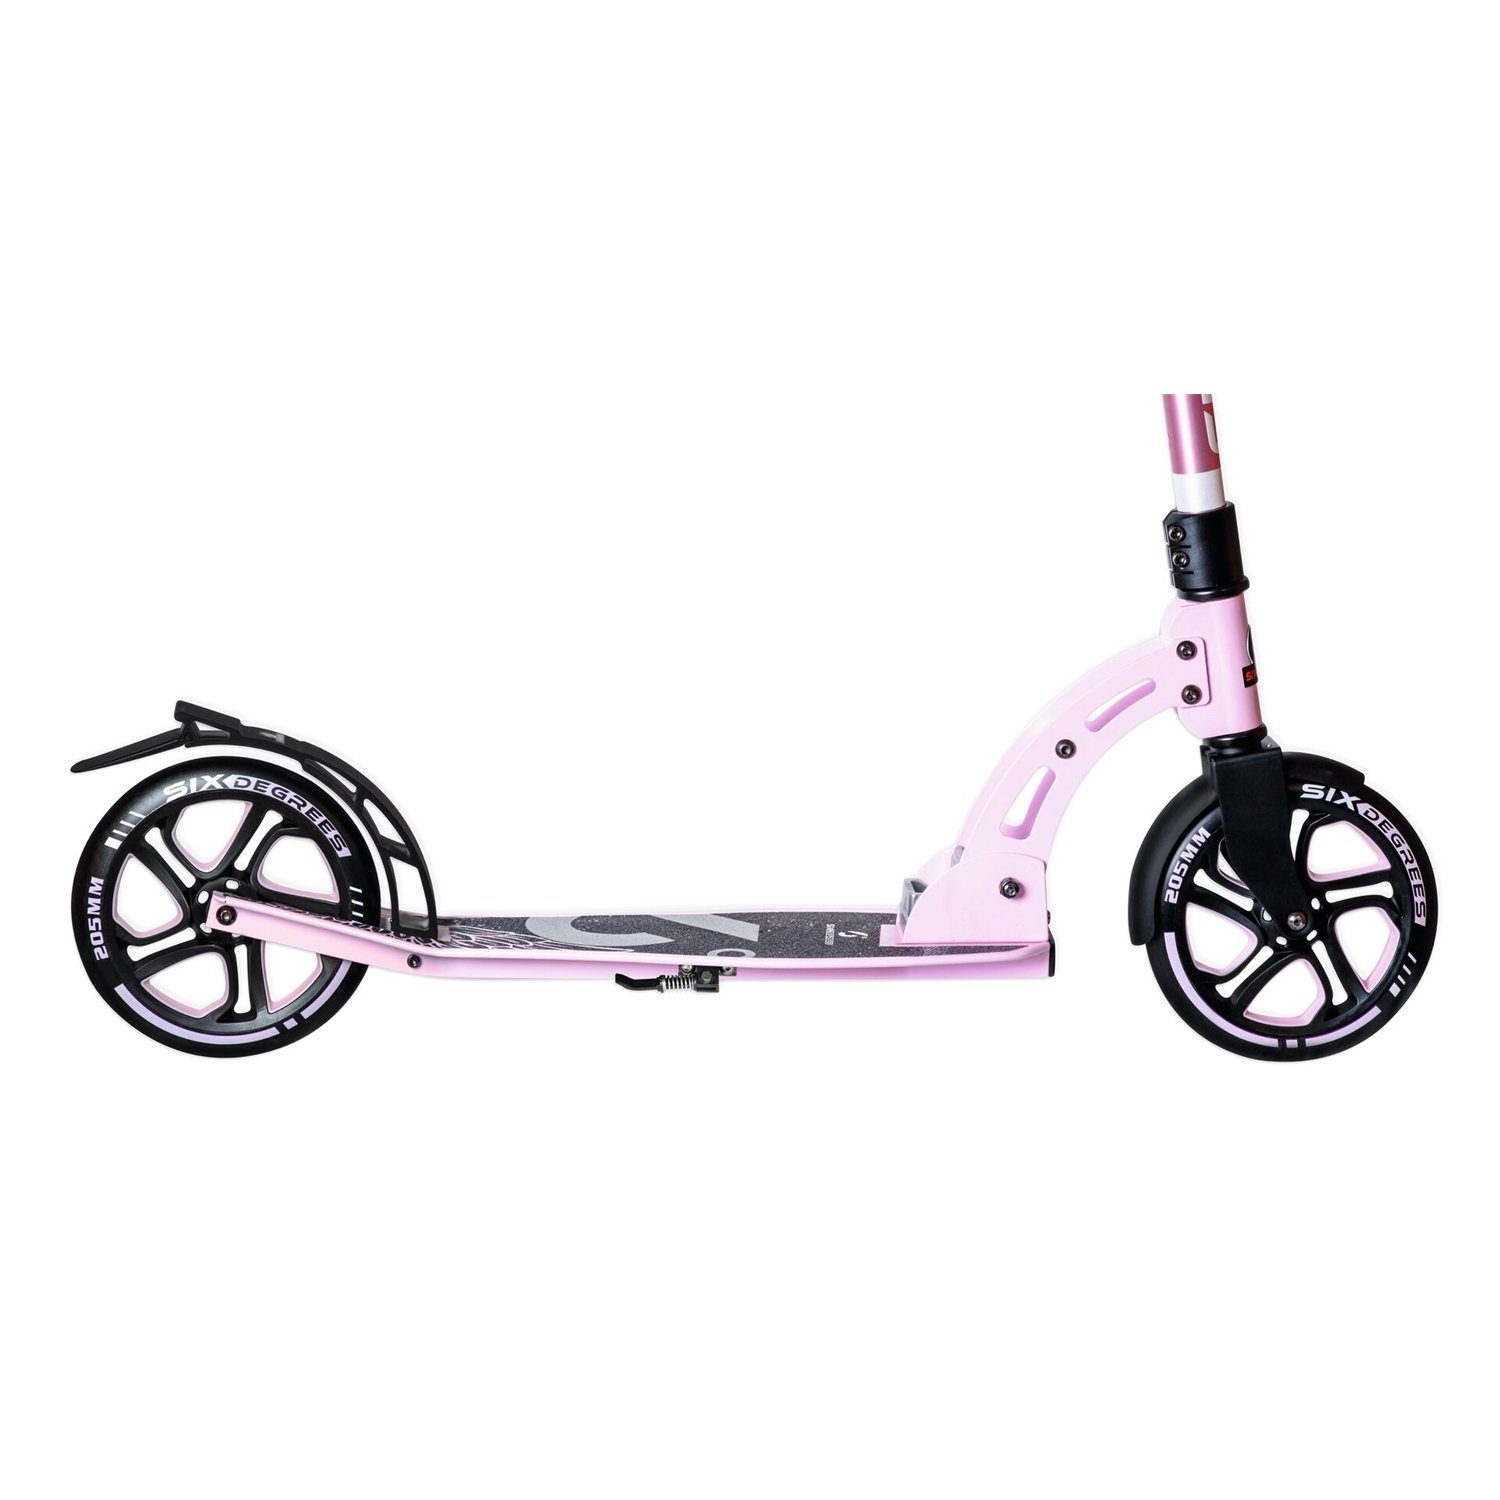 Scooter sports & 569 pastell-pink SIX Aluminium 205 authentic DEGREES Scooter mm toys